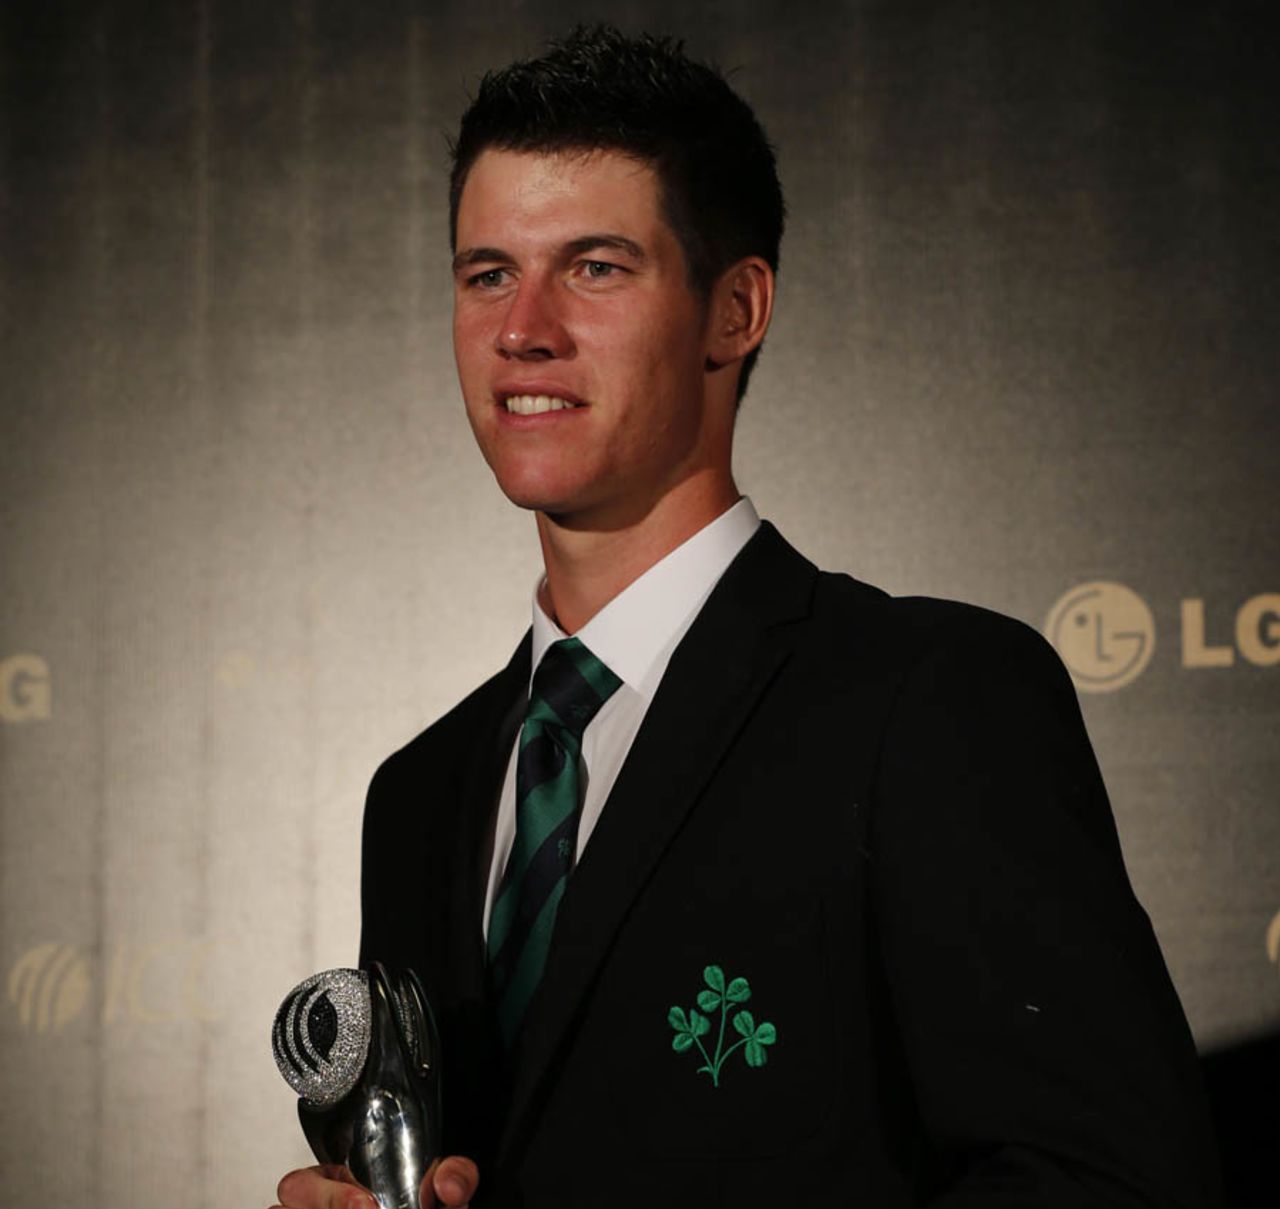 George Dockrell with the Associate and Affiliate Cricketer of the Year award, Colombo, September 15, 2012